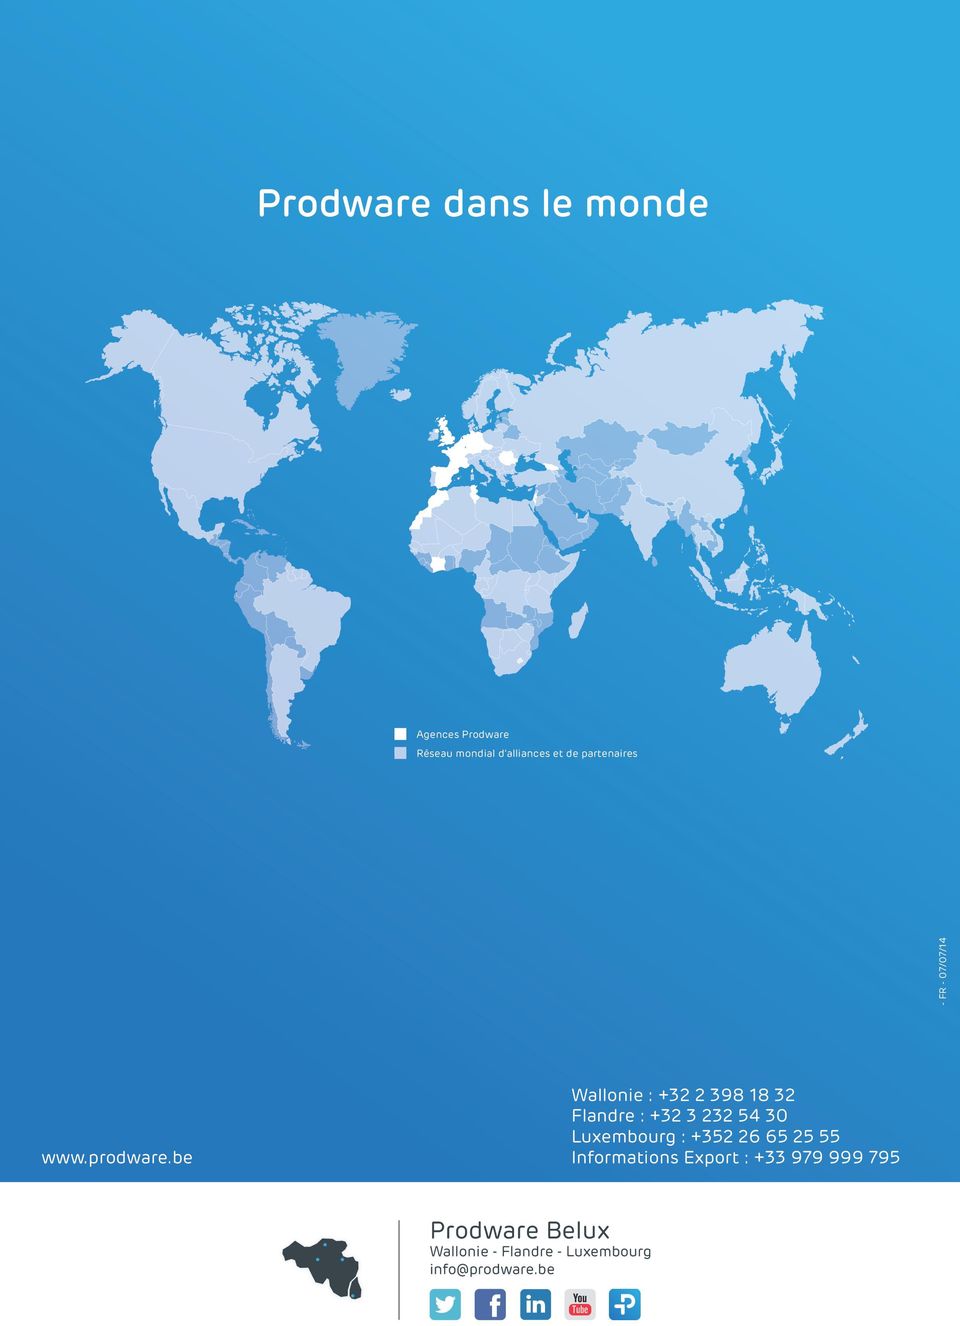 54 30 Luxembourg : +352 26 65 25 55 www.prodware.